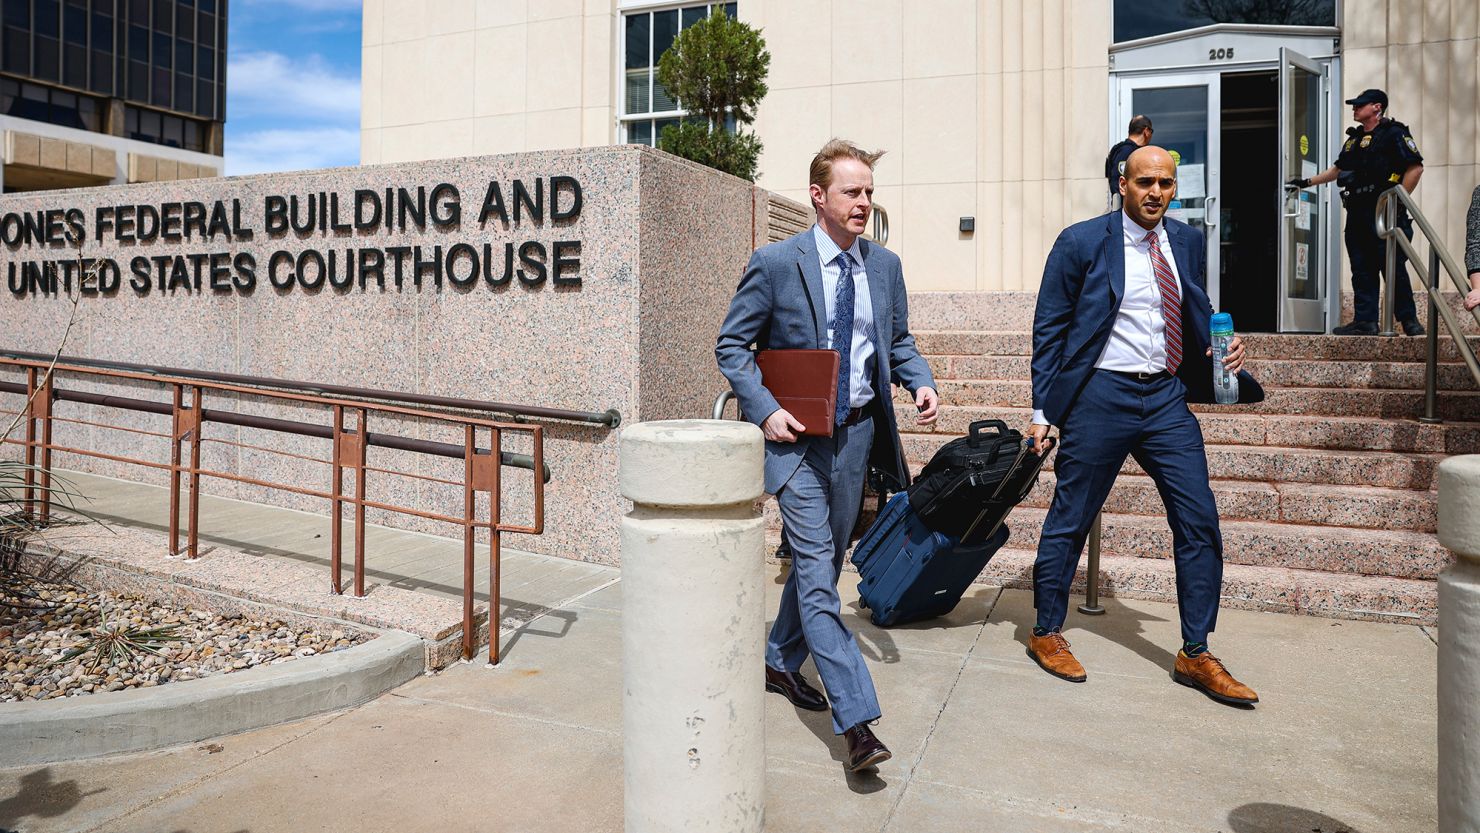 Erik Baptist, right, and other legal team members with Alliance Defending Freedom exit the federal court building on March 15, 2023, in Amarillo, Texas.